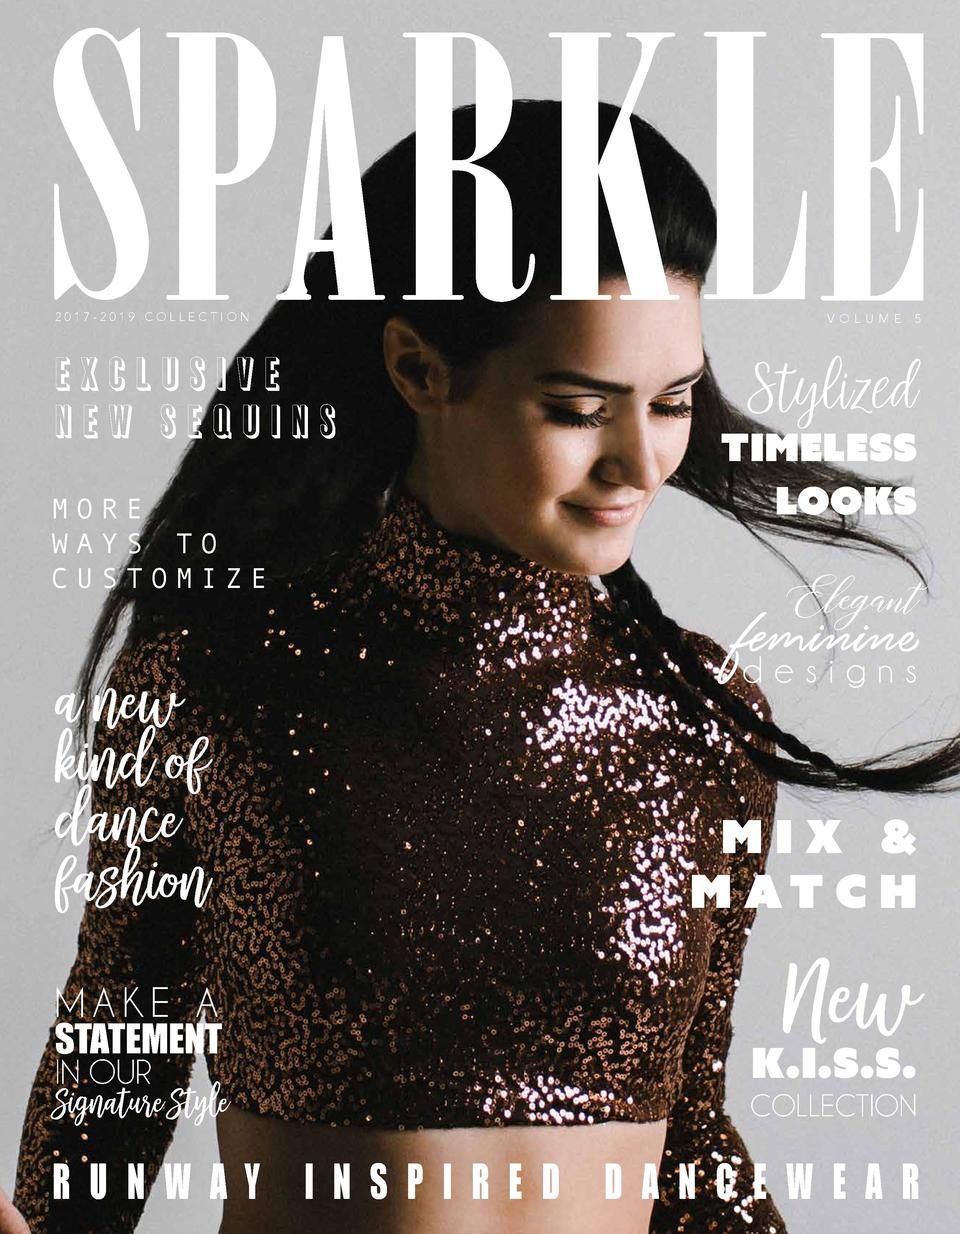 Sparkle instal the new